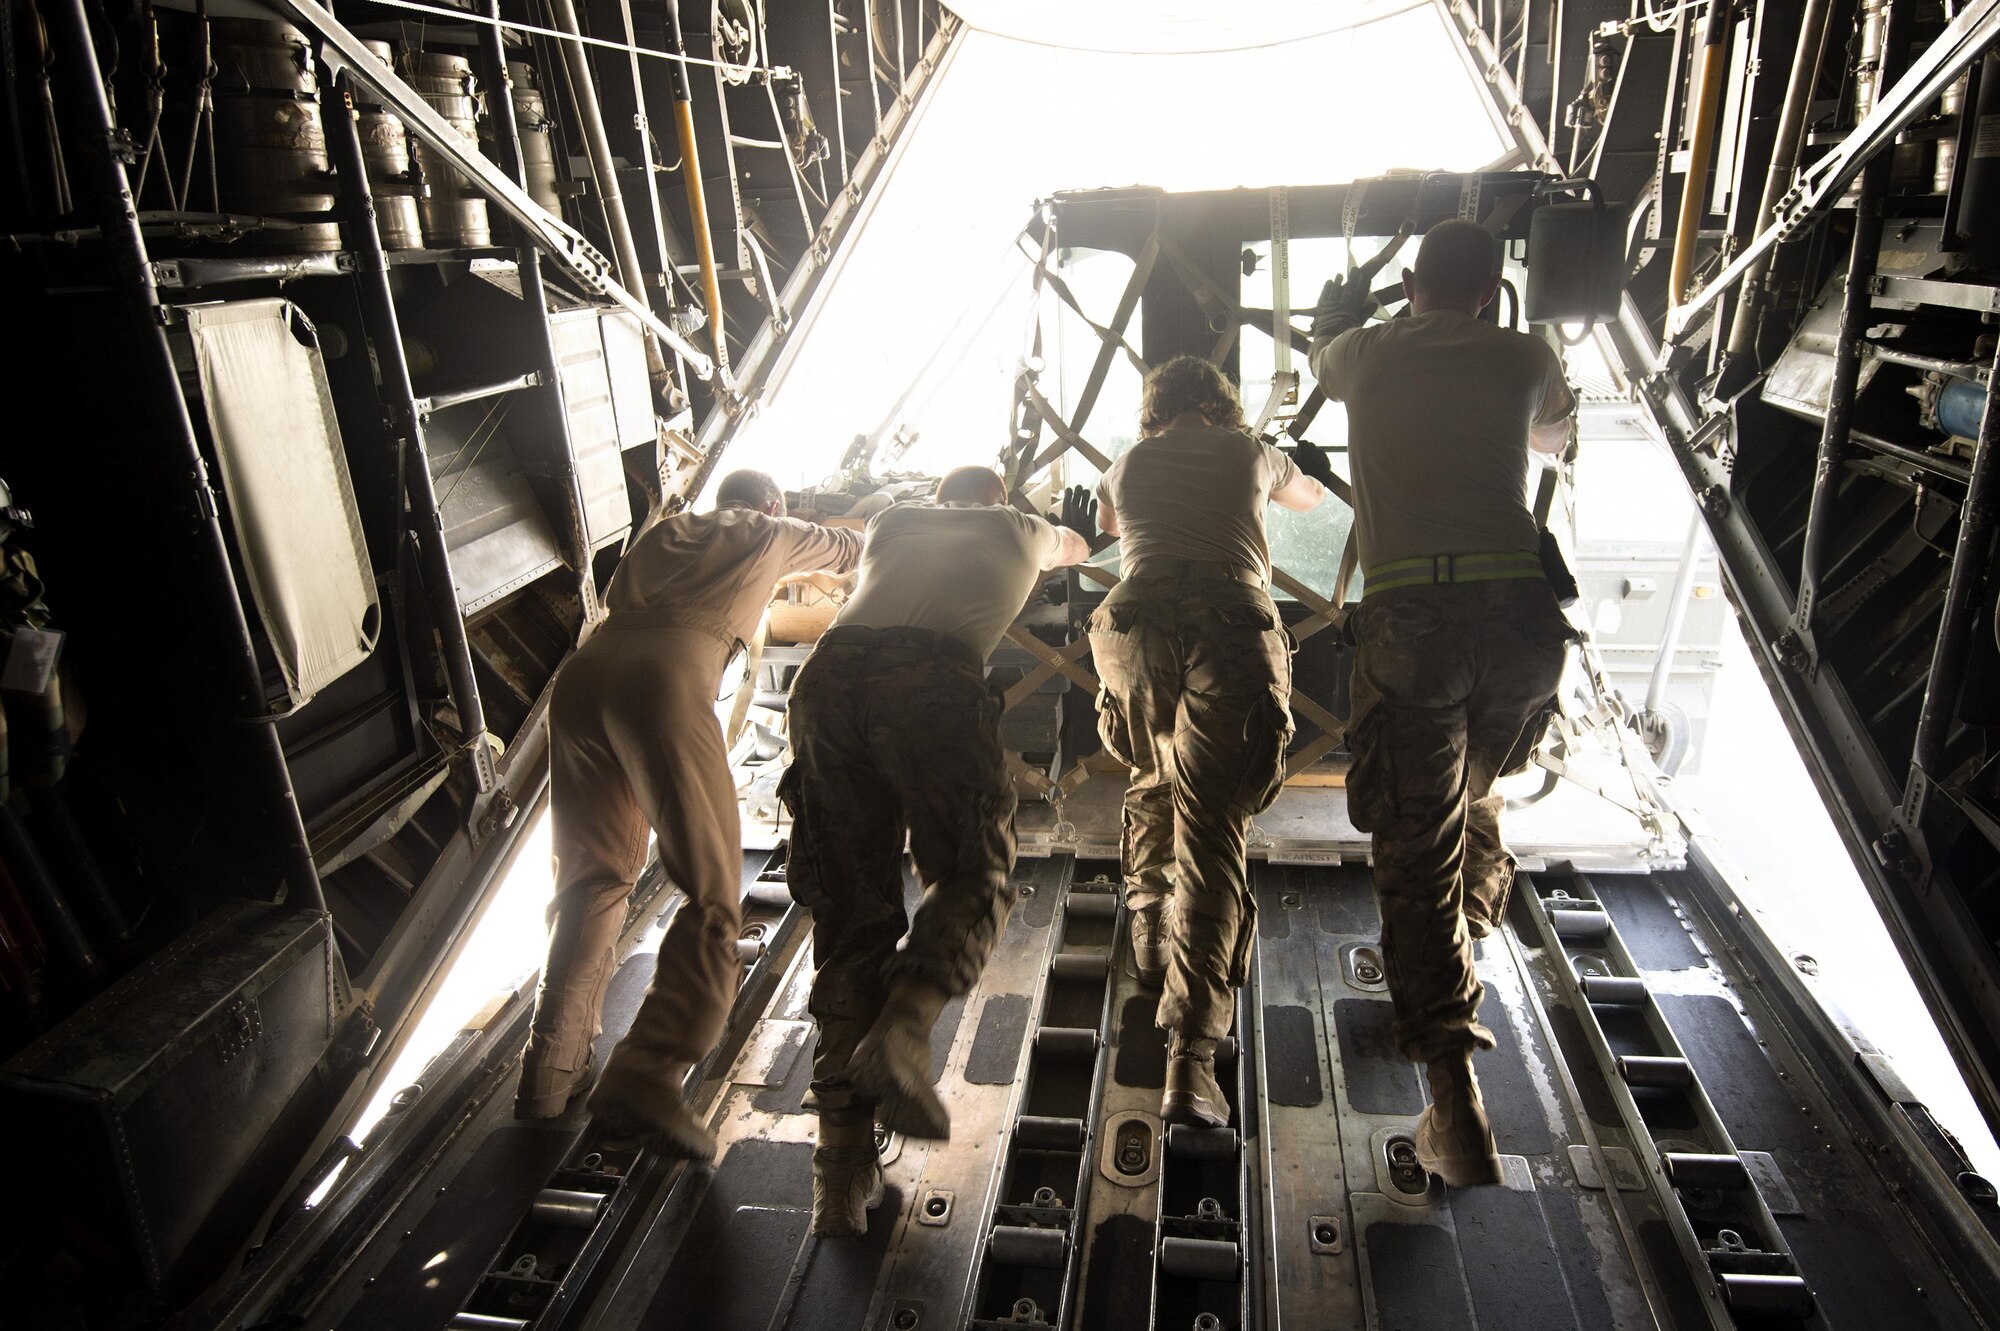 Senior Airman Zac Sidders, 774th Expeditionary Airlift Squadron loadmaster, assists aerial porters from the 455th Expeditionary Aerial Port Squadron pushing cargo off a C-130 Hercules at Bagram Air Field, Afghanistan, Sept. 28, 2013. This mission marked a retrograde milestone as the 774th EAS transported the last cargo from Forward Operating Base Sharana, Paktika province, Afghanistan, before the base is transferred to the Afghan Ministry of Defense. Sidders, a Peoria, Ill., native, is deployed from the Wyoming Air National Guard. 